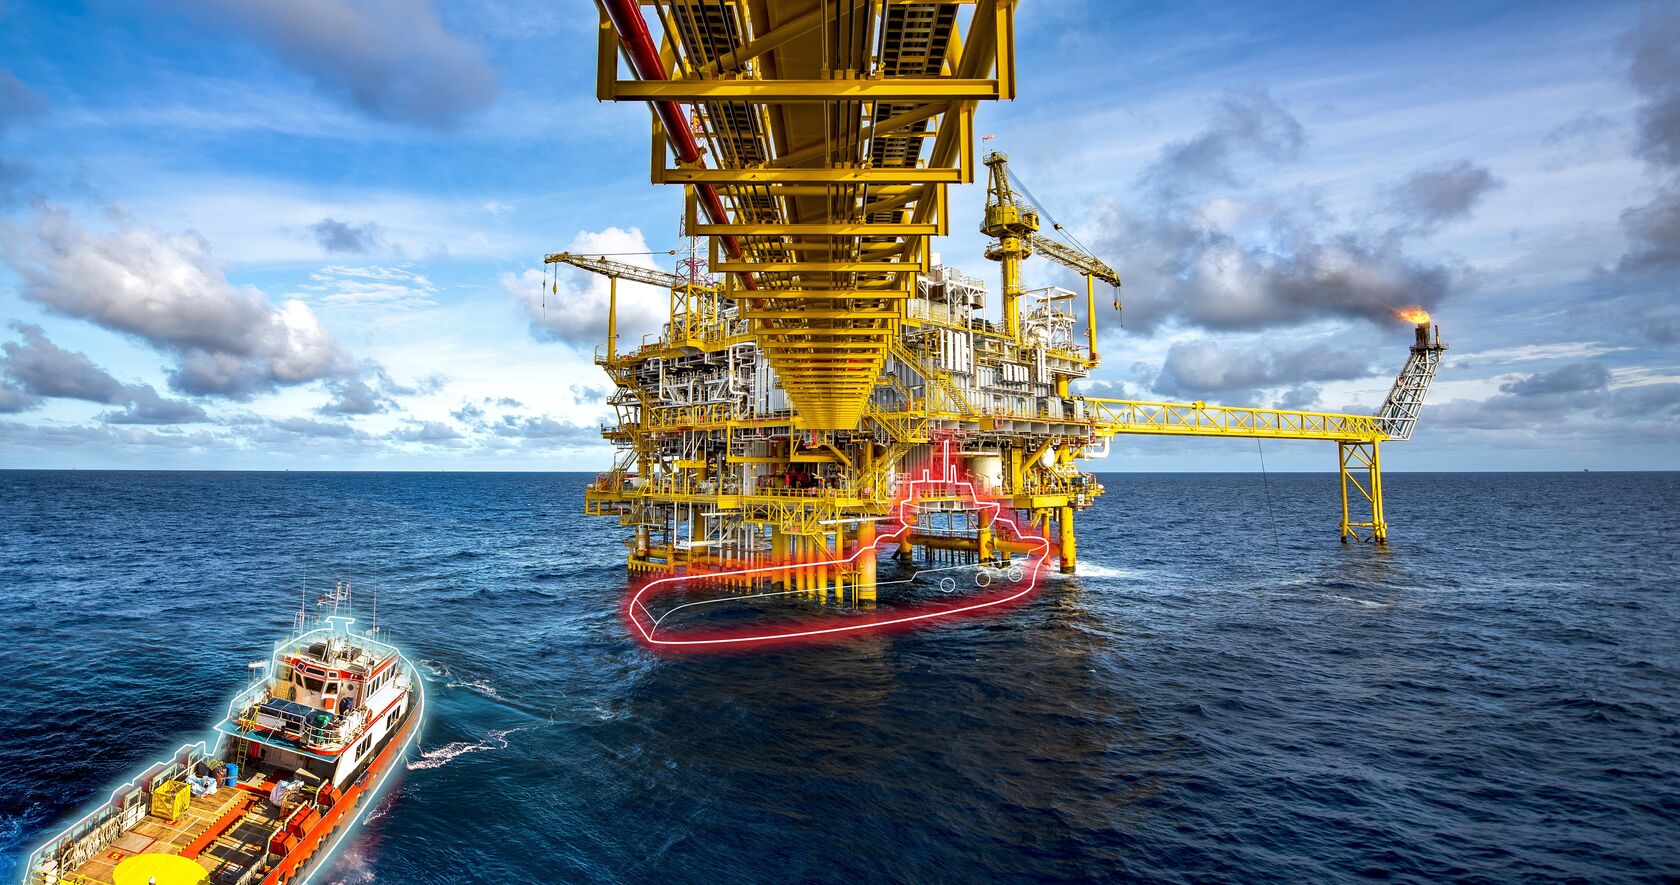 Offshore support vessel approaching an oil rig, colourful outlines symbolize how spoofing could make the positioning officer collide with the rig.